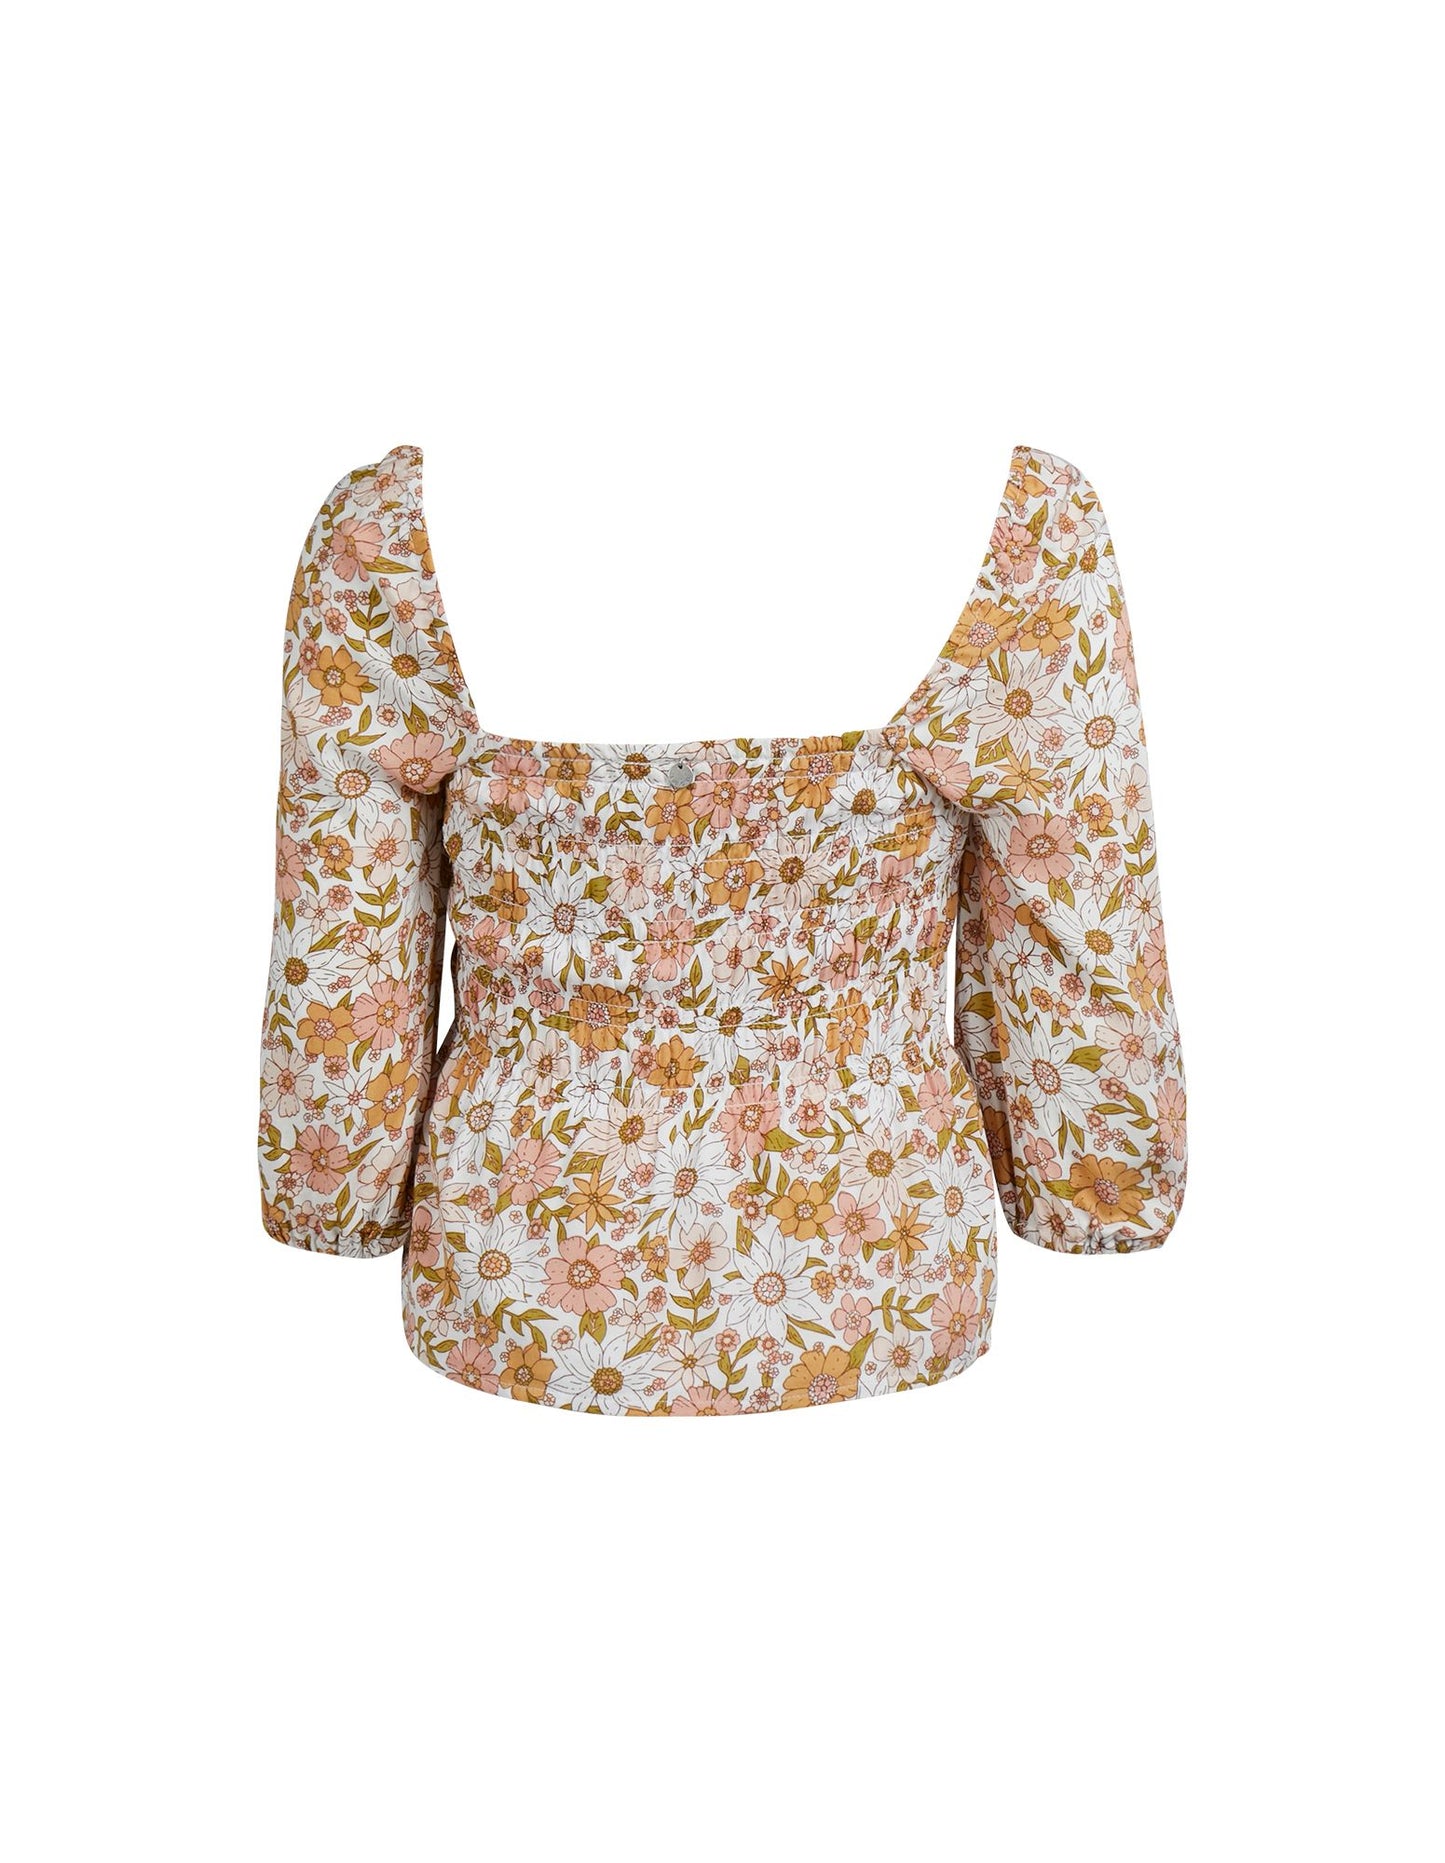 Maisie Floral Top - Lucky Last! (Size 10)